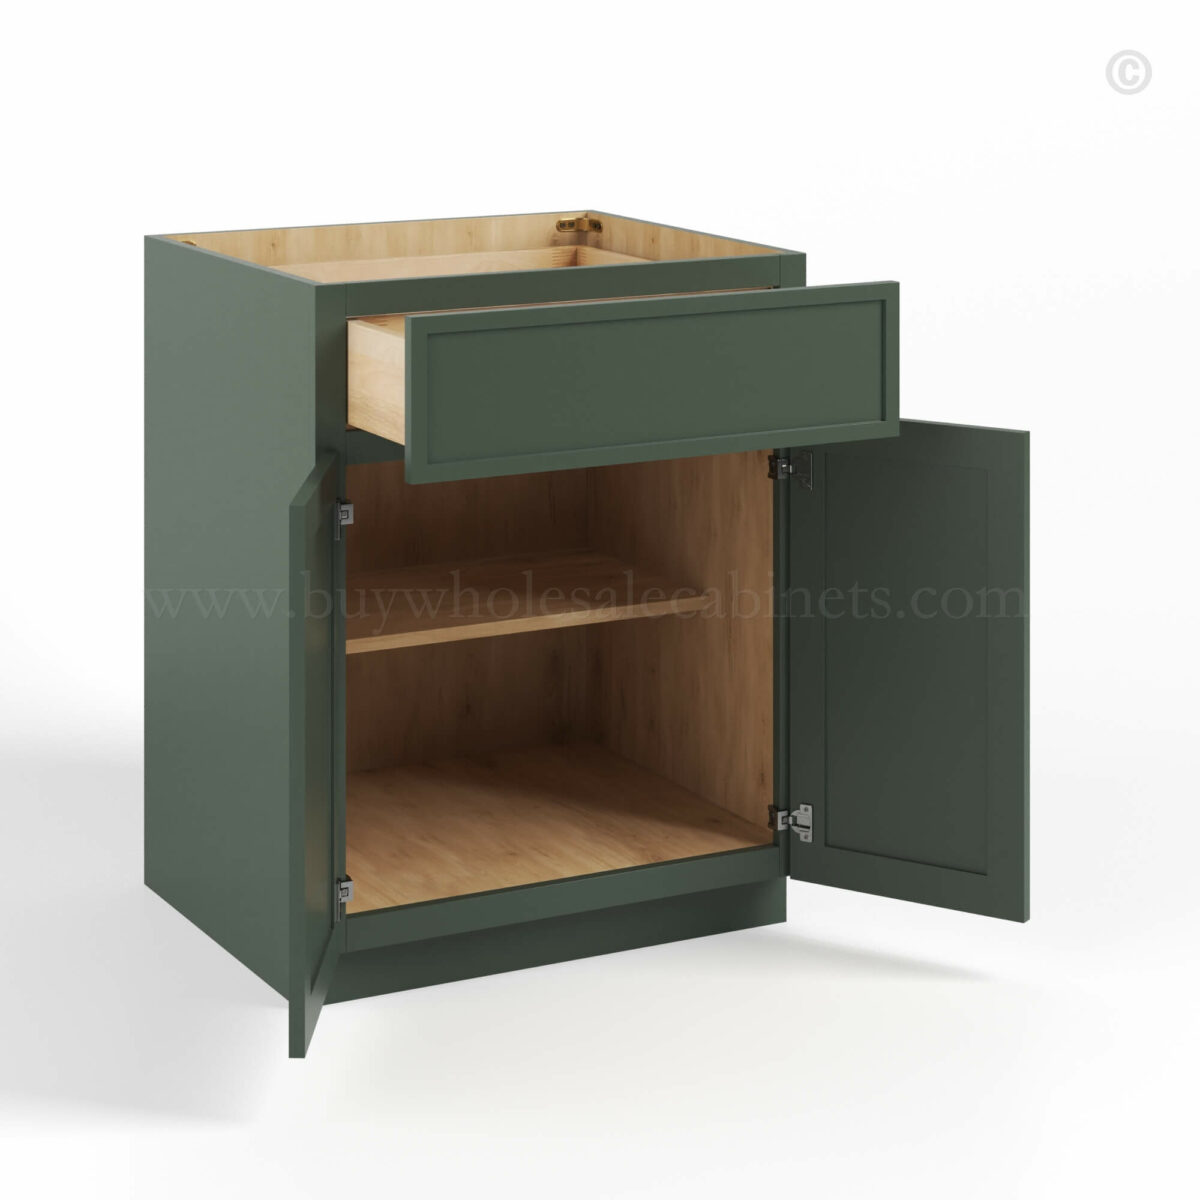 Slim Shaker Green Base Cabinet Double Door & Single Drawer, rta cabinets, wholesale cabinets